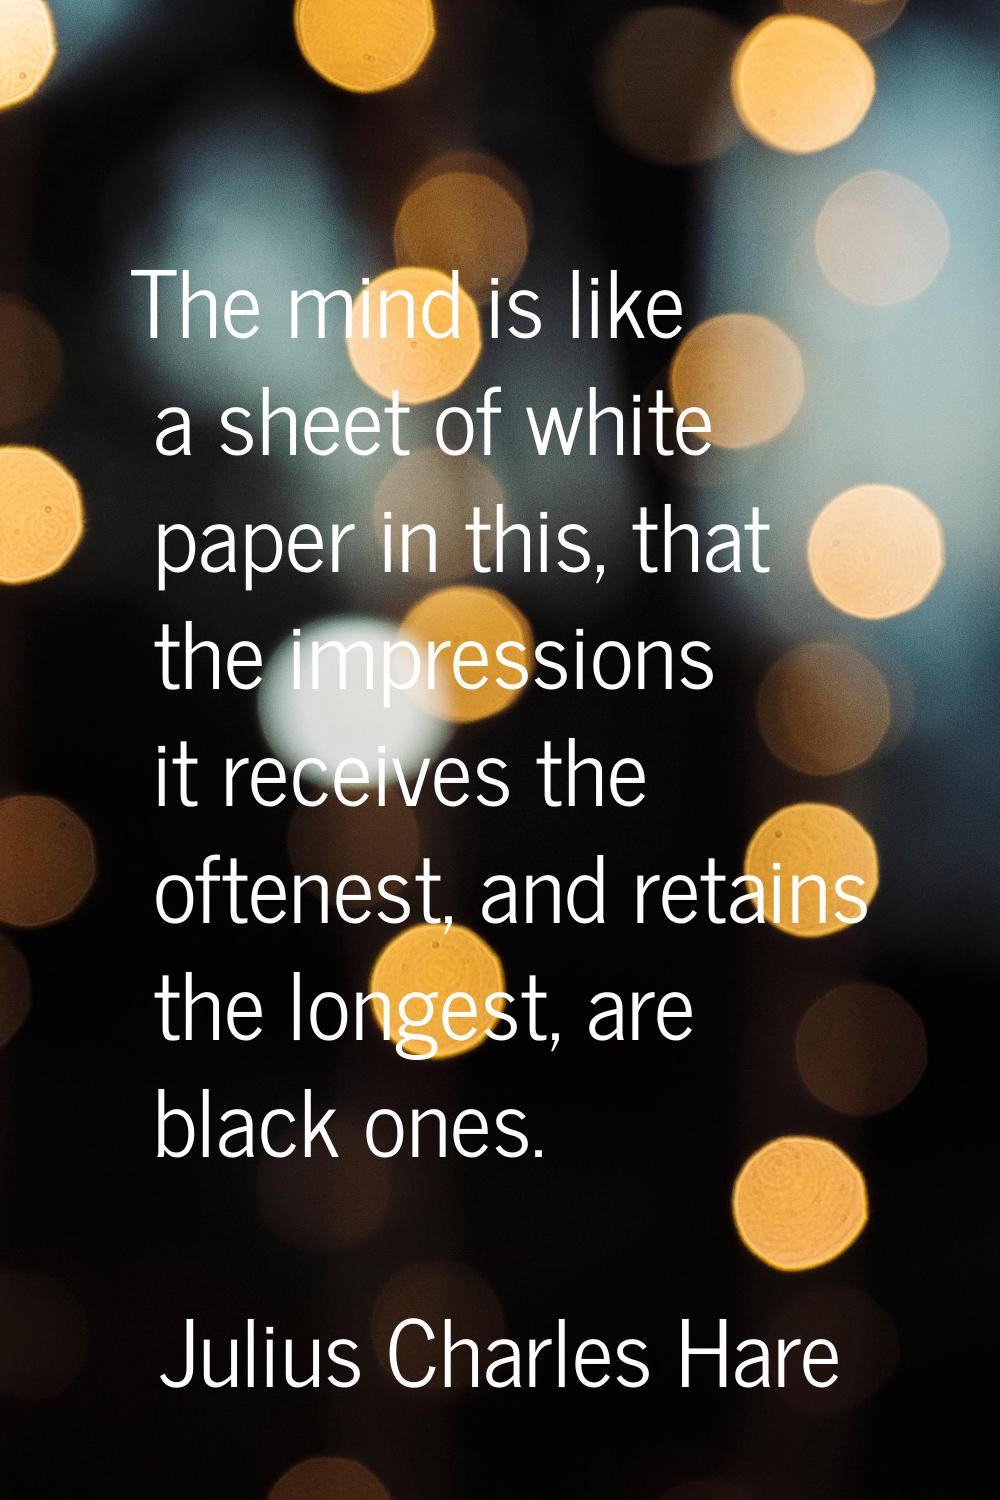 The mind is like a sheet of white paper in this, that the impressions it receives the oftenest, and